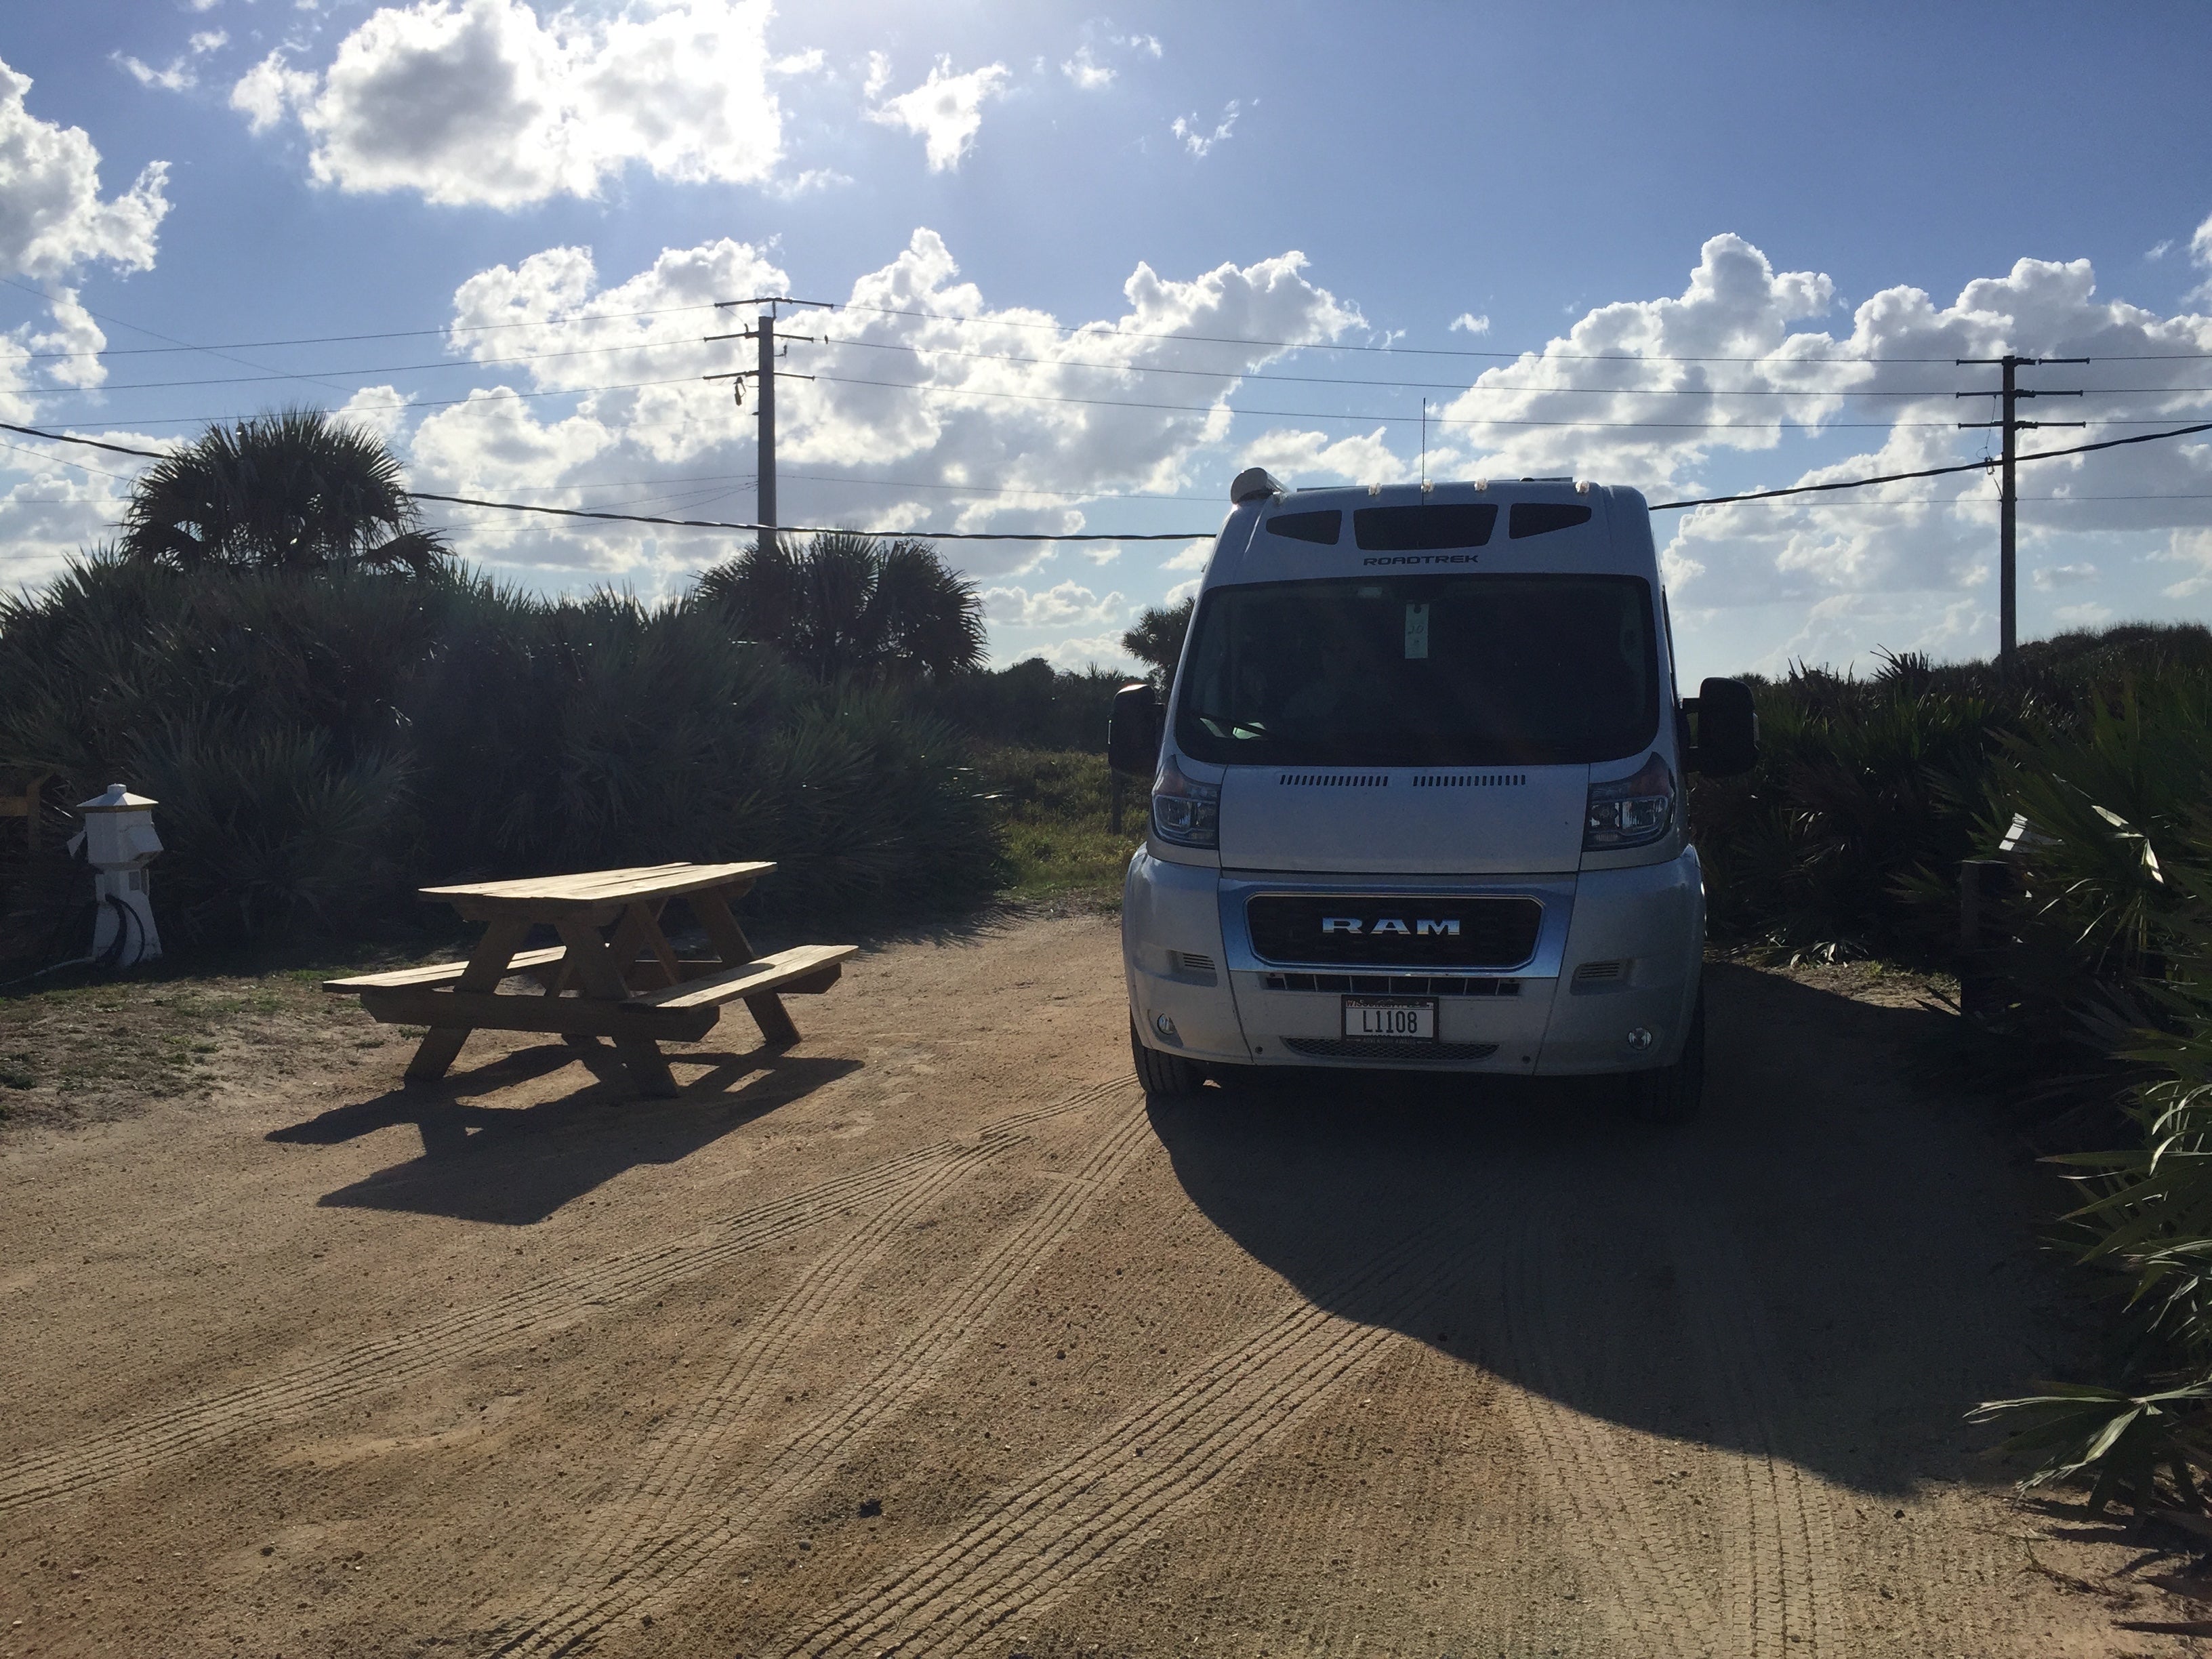 Camper submitted image from Gamble Rogers Memorial State Recreation Area at Flagler Beach - 1